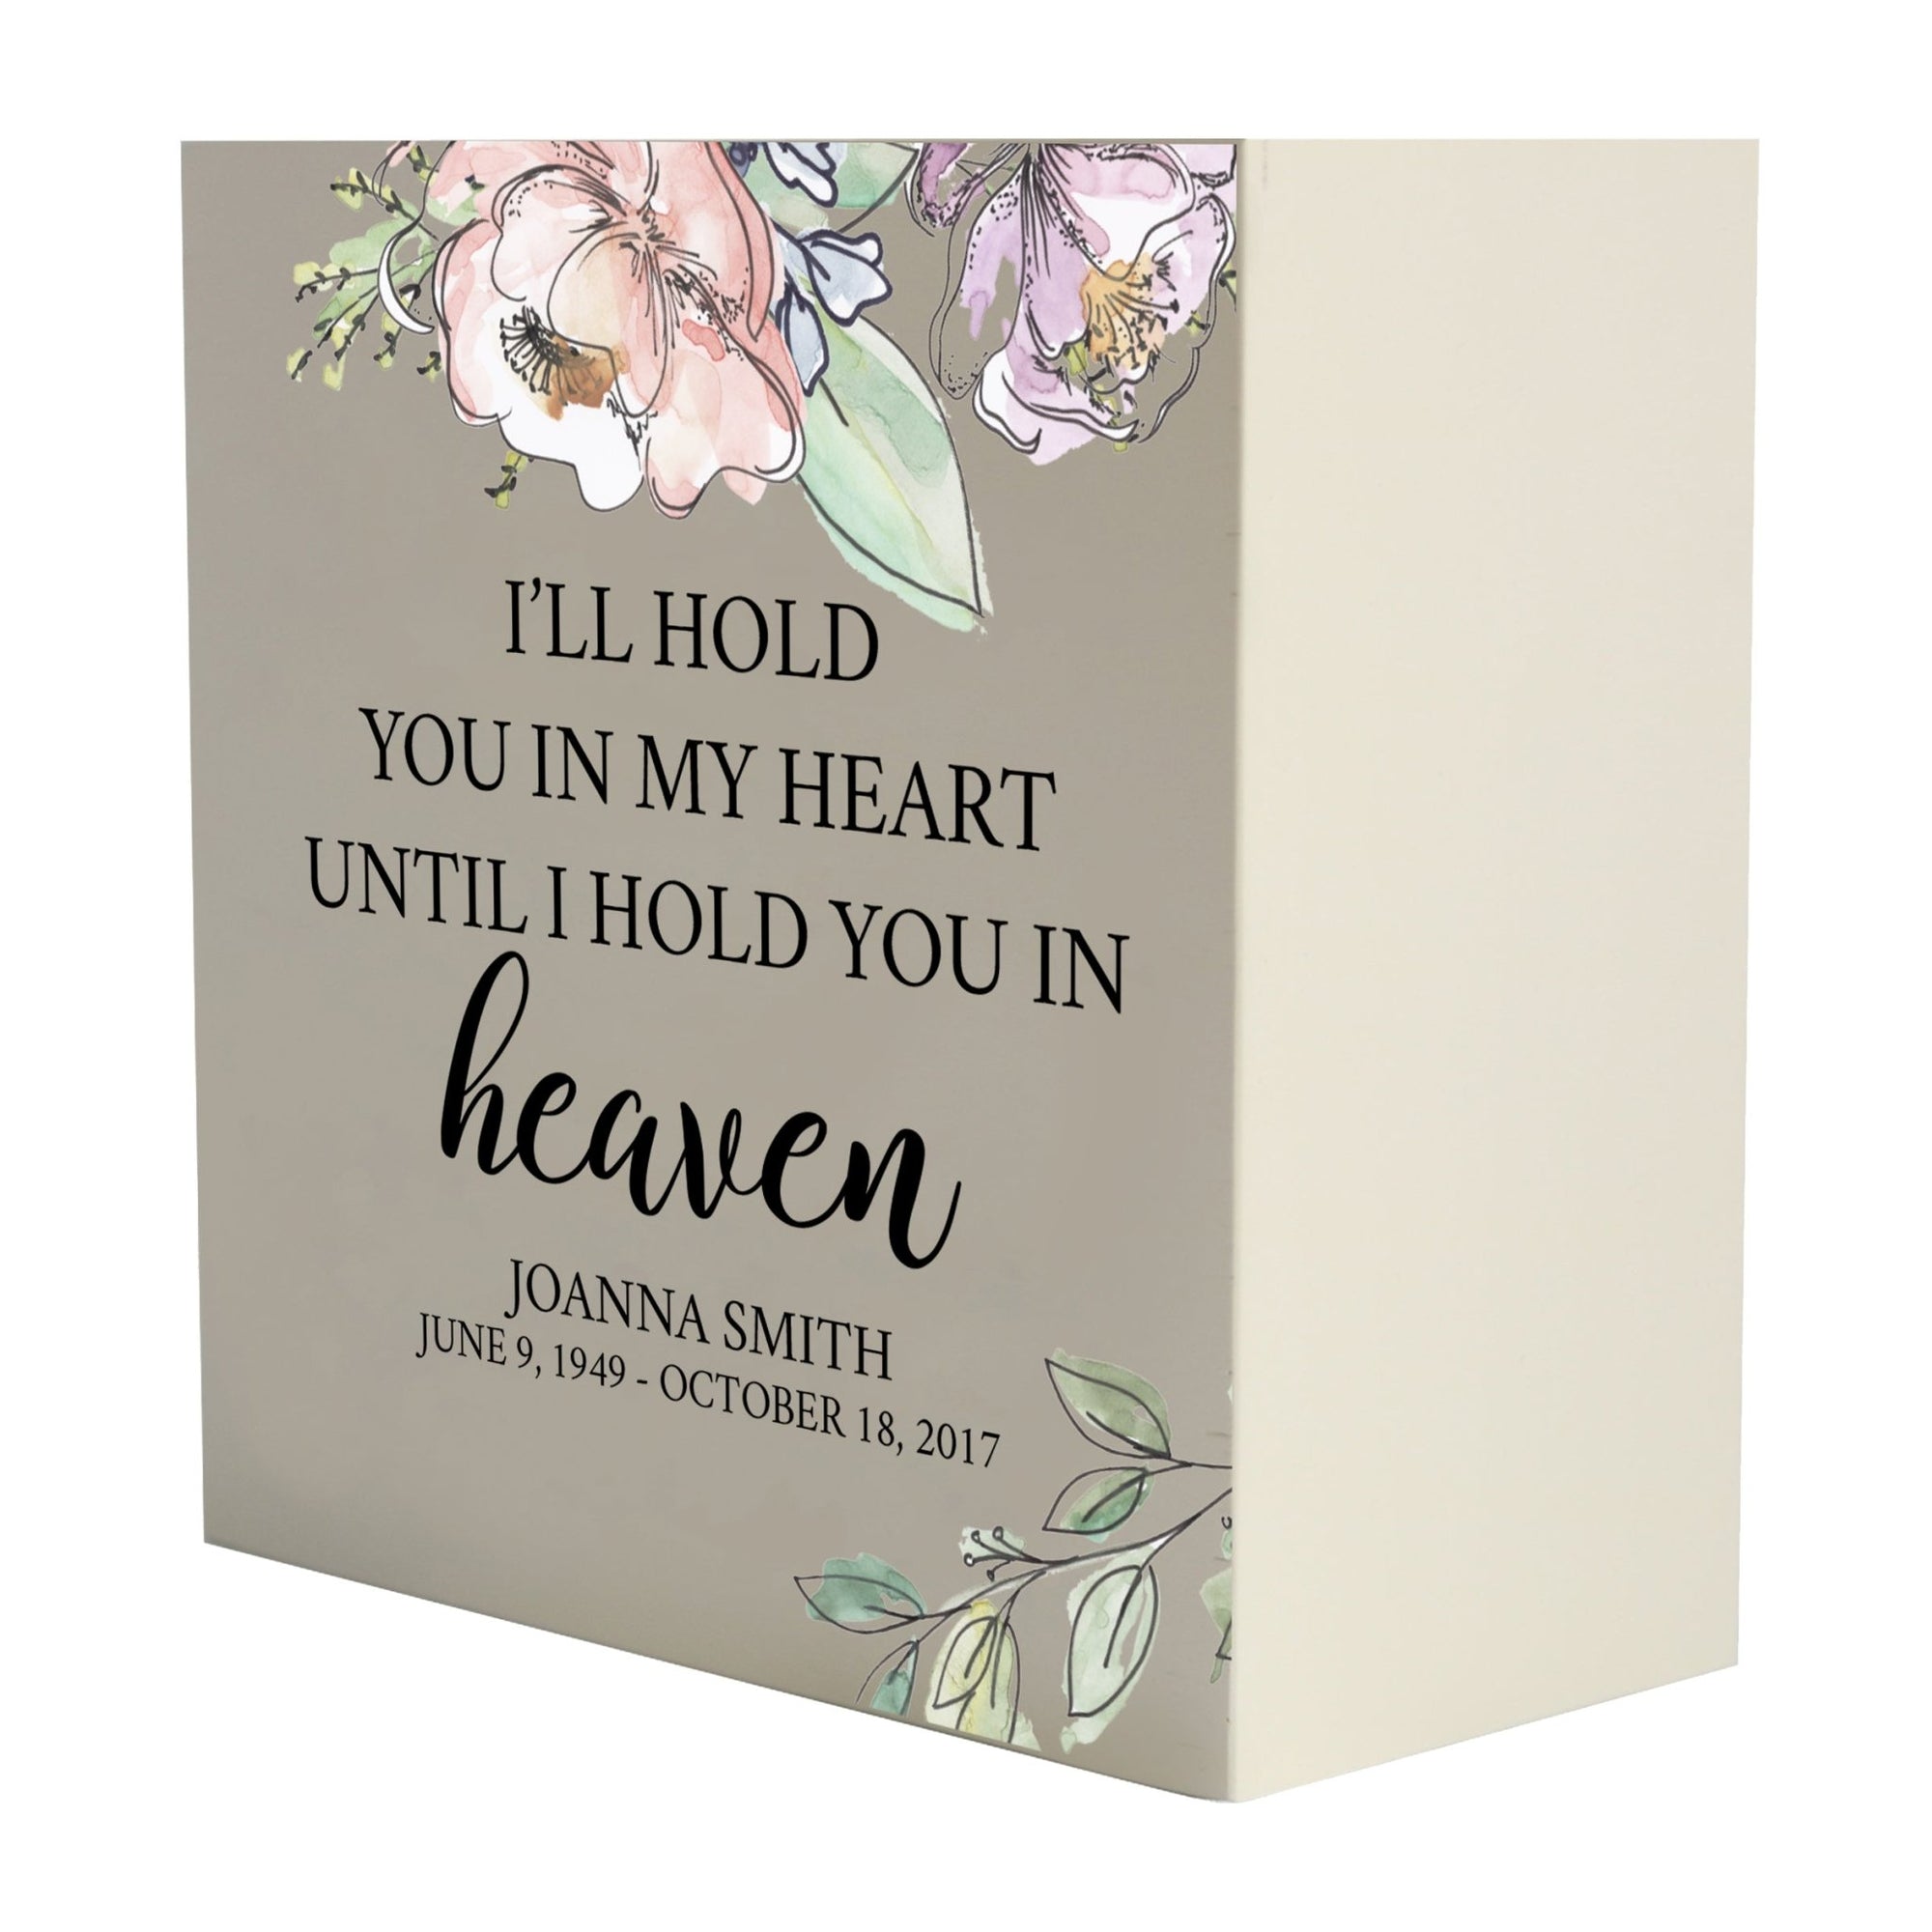 Personalized Modern Inspirational Memorial Wooden Shadow Box and Urn 6x6 holds 53 cu in of Human Ashes - I’ll Hold You (Heart) - LifeSong Milestones